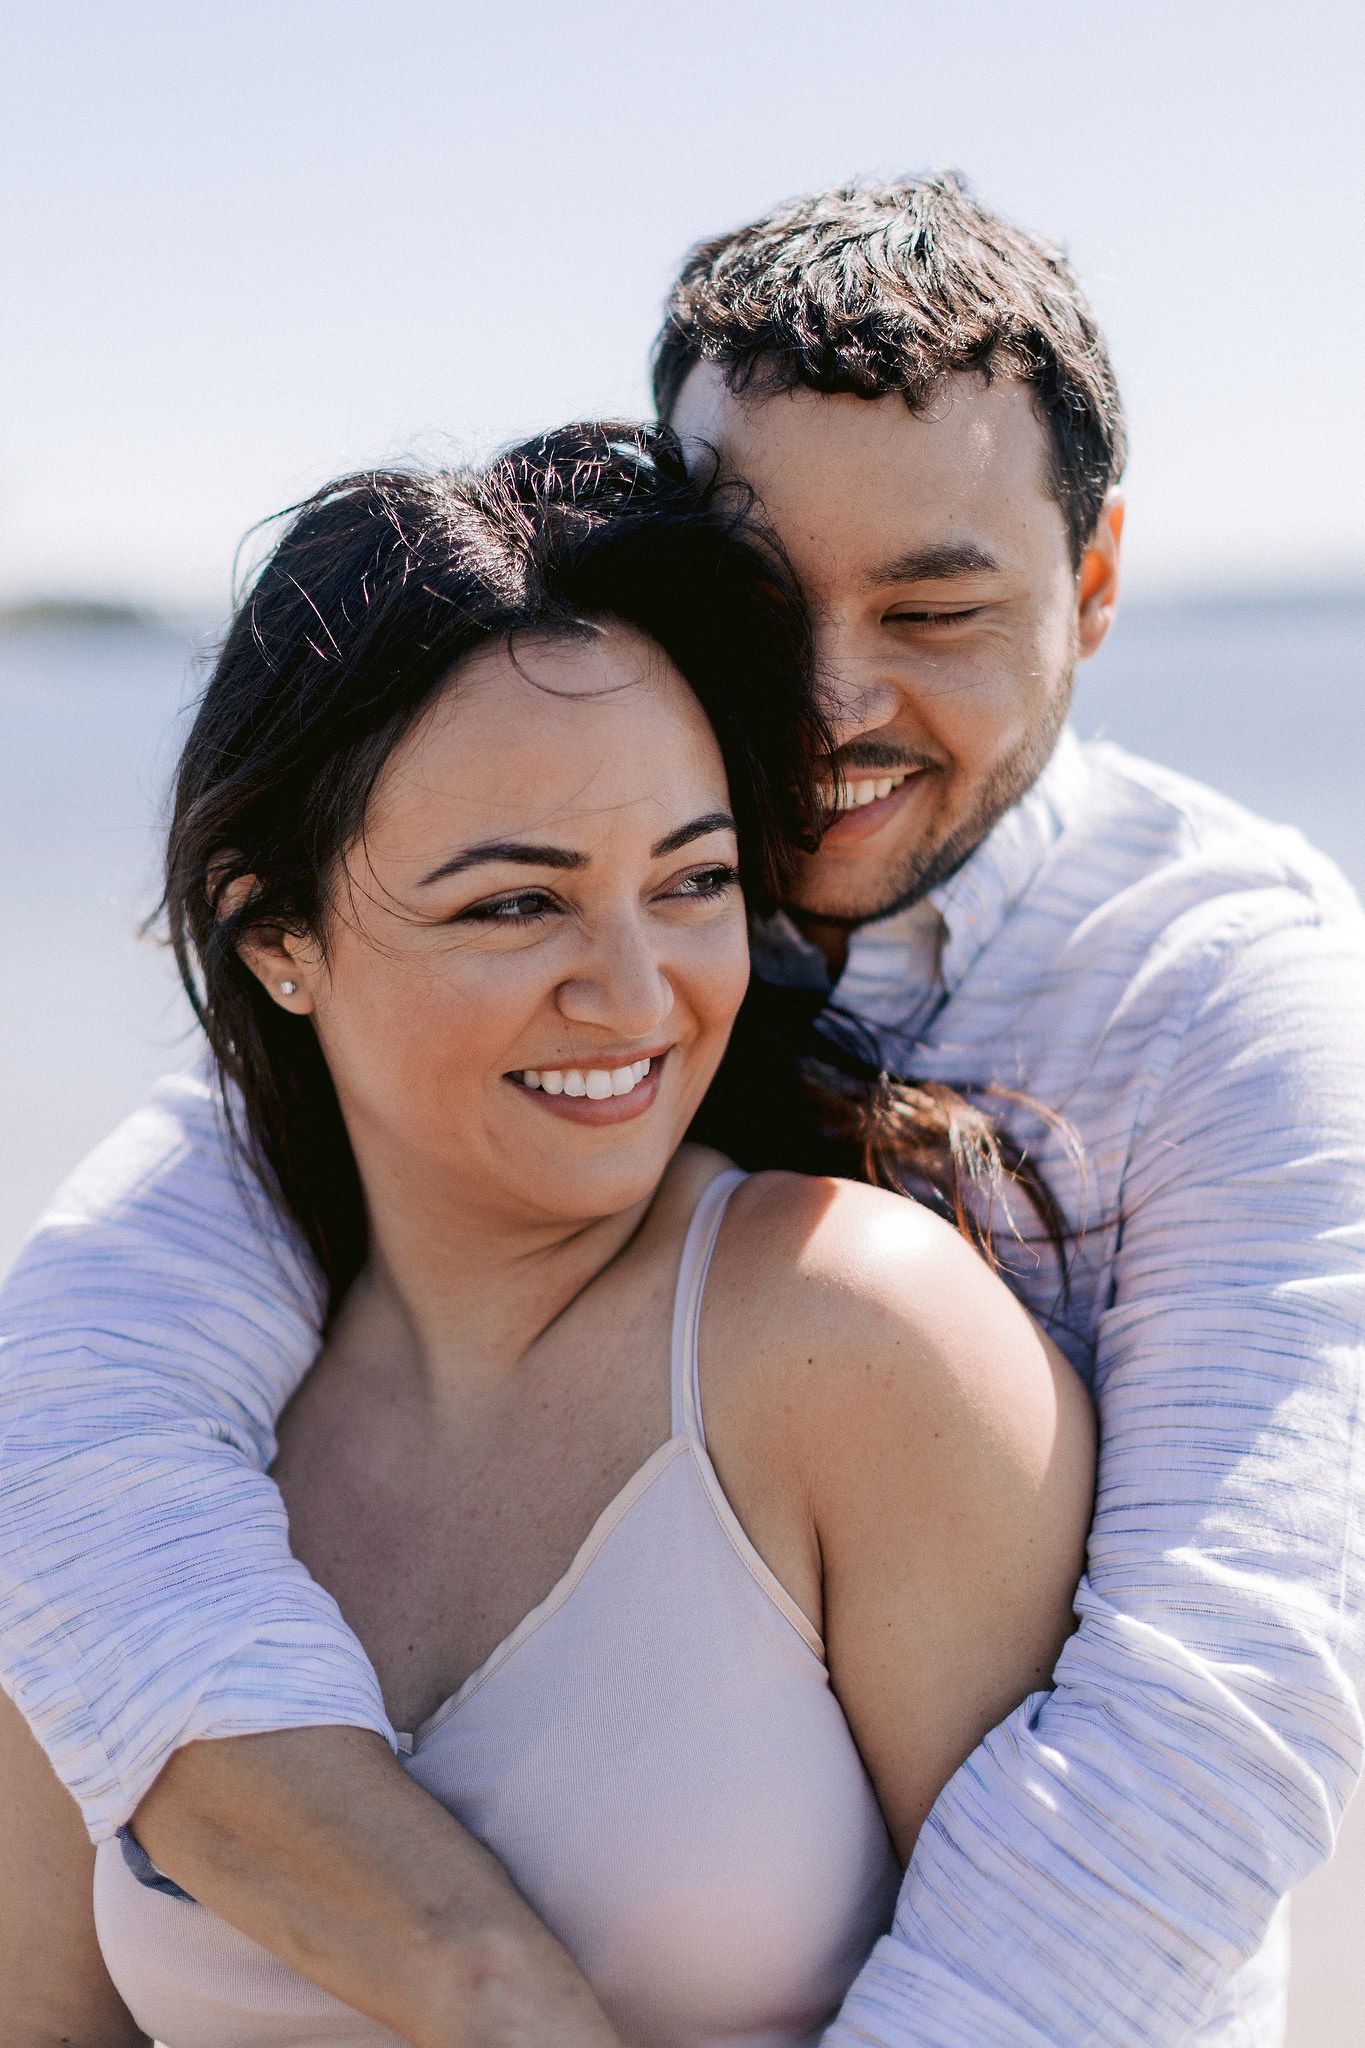 The man is hugging his soon-to-be wife in the seashore. NYC spring engagement Image by Jenny Fu Studio